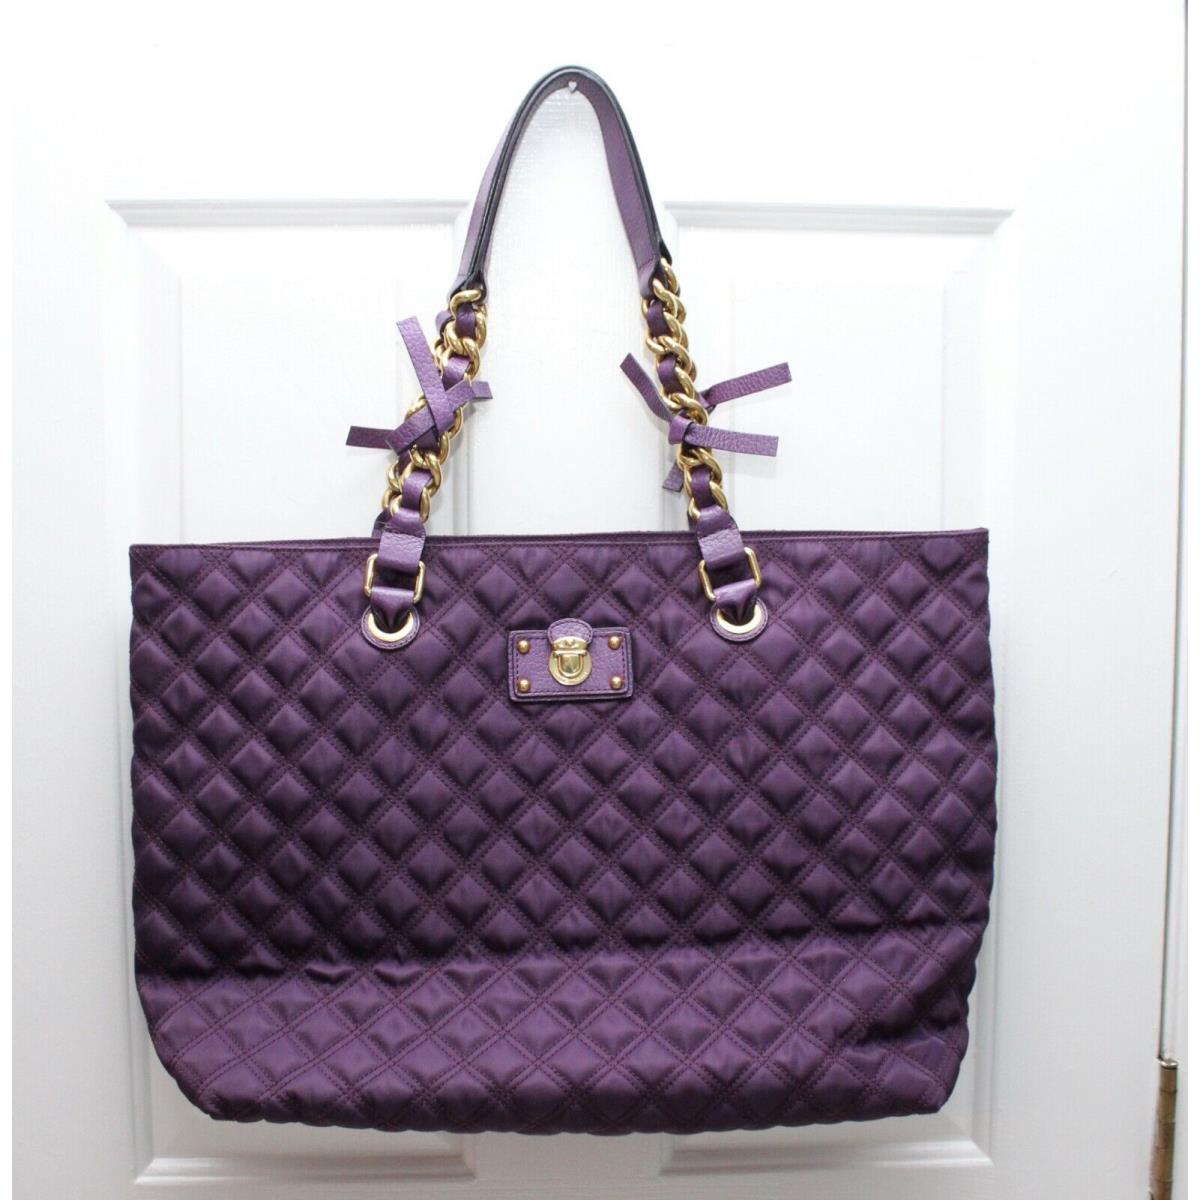 Marc Jacobs Large Purple Quilted Leather Tote Handbag